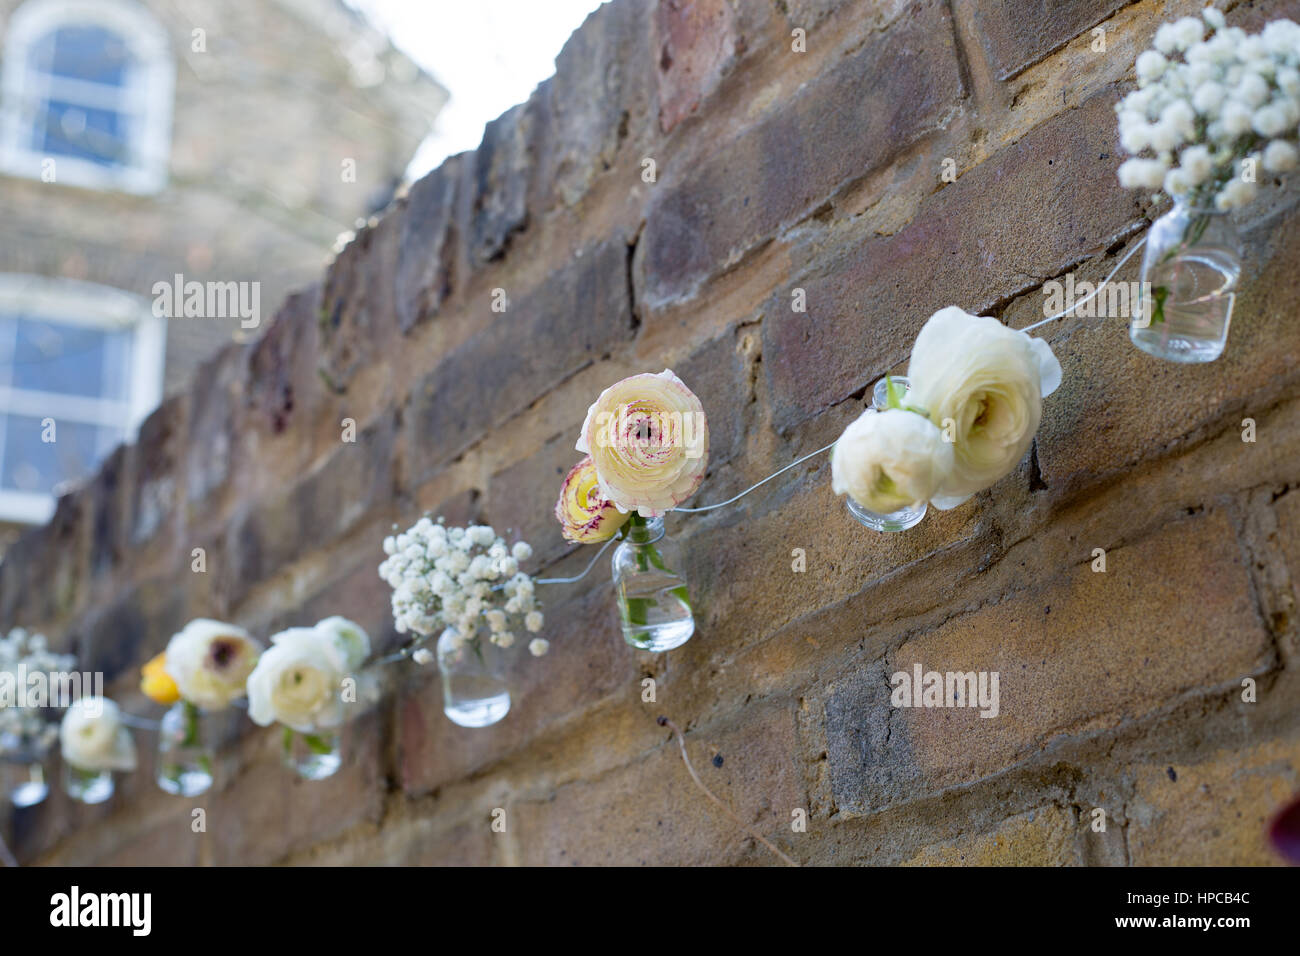 White and pink flowers decorate a brick wall Stock Photo